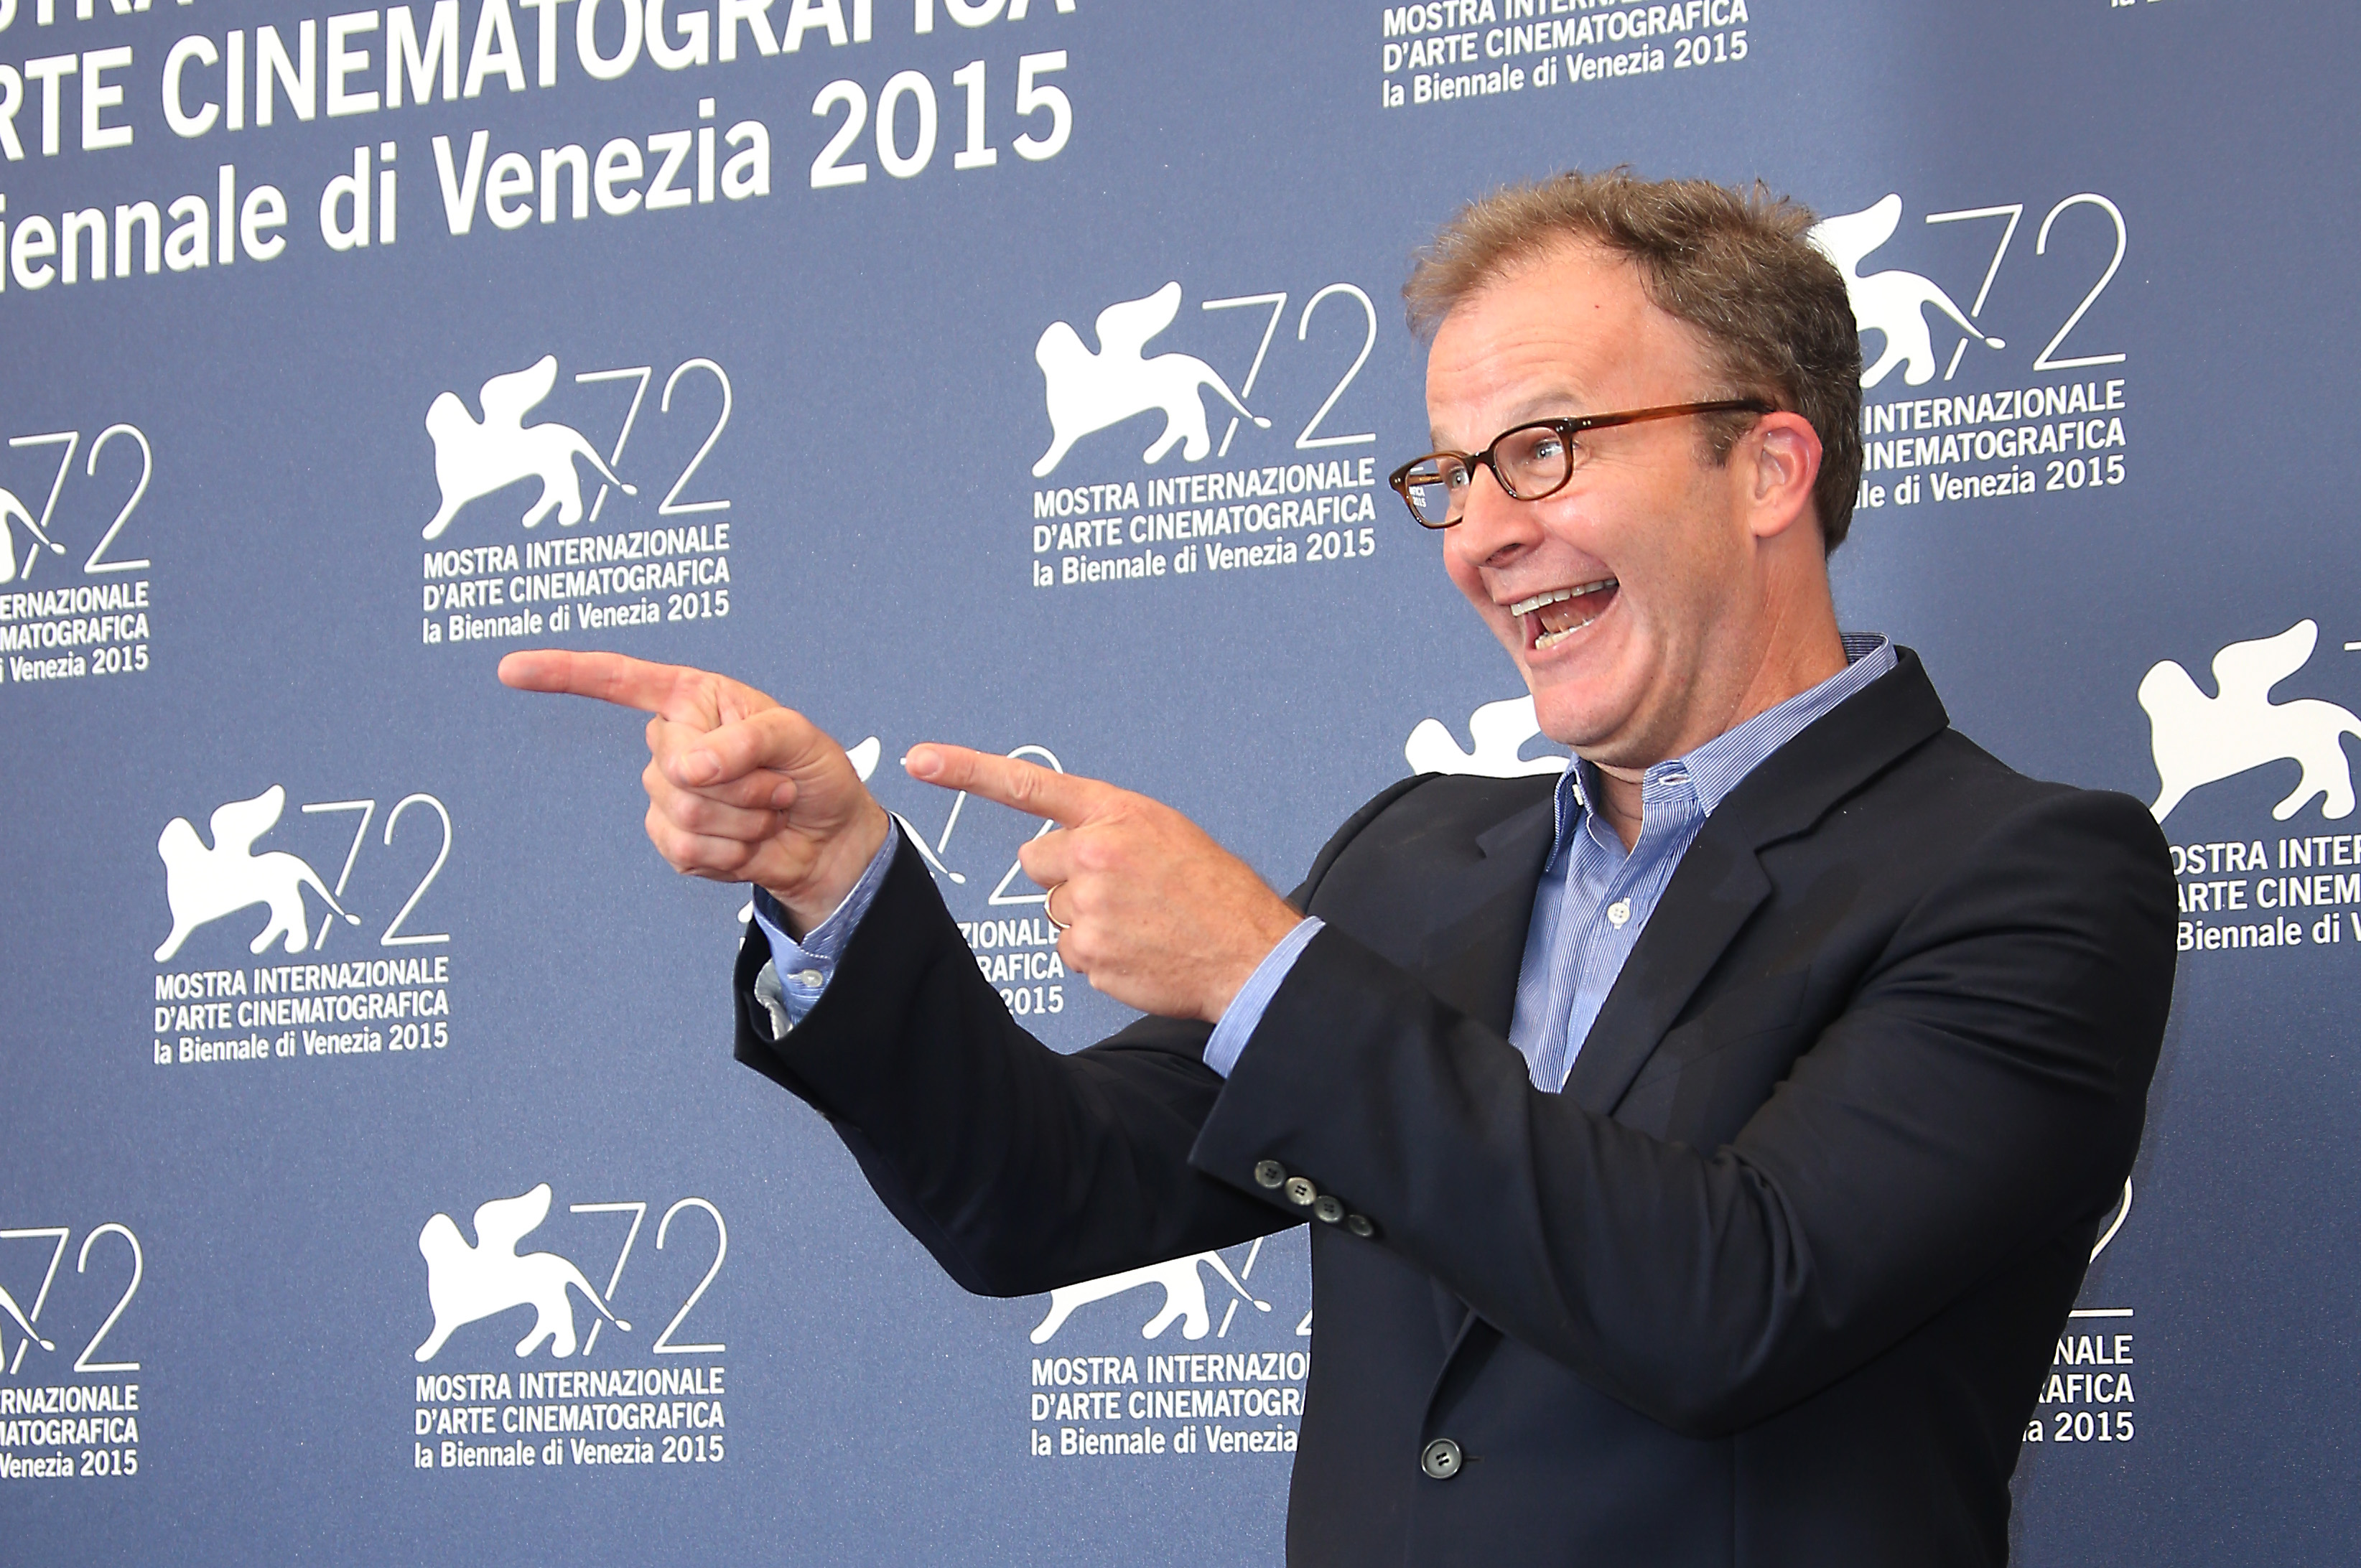 Actor Thomas McCarthy at the photo call for the film Spotlight during the 72nd edition of the Venice Film Festival in Venice, Italy, Thursday, Sept. 3, 2015